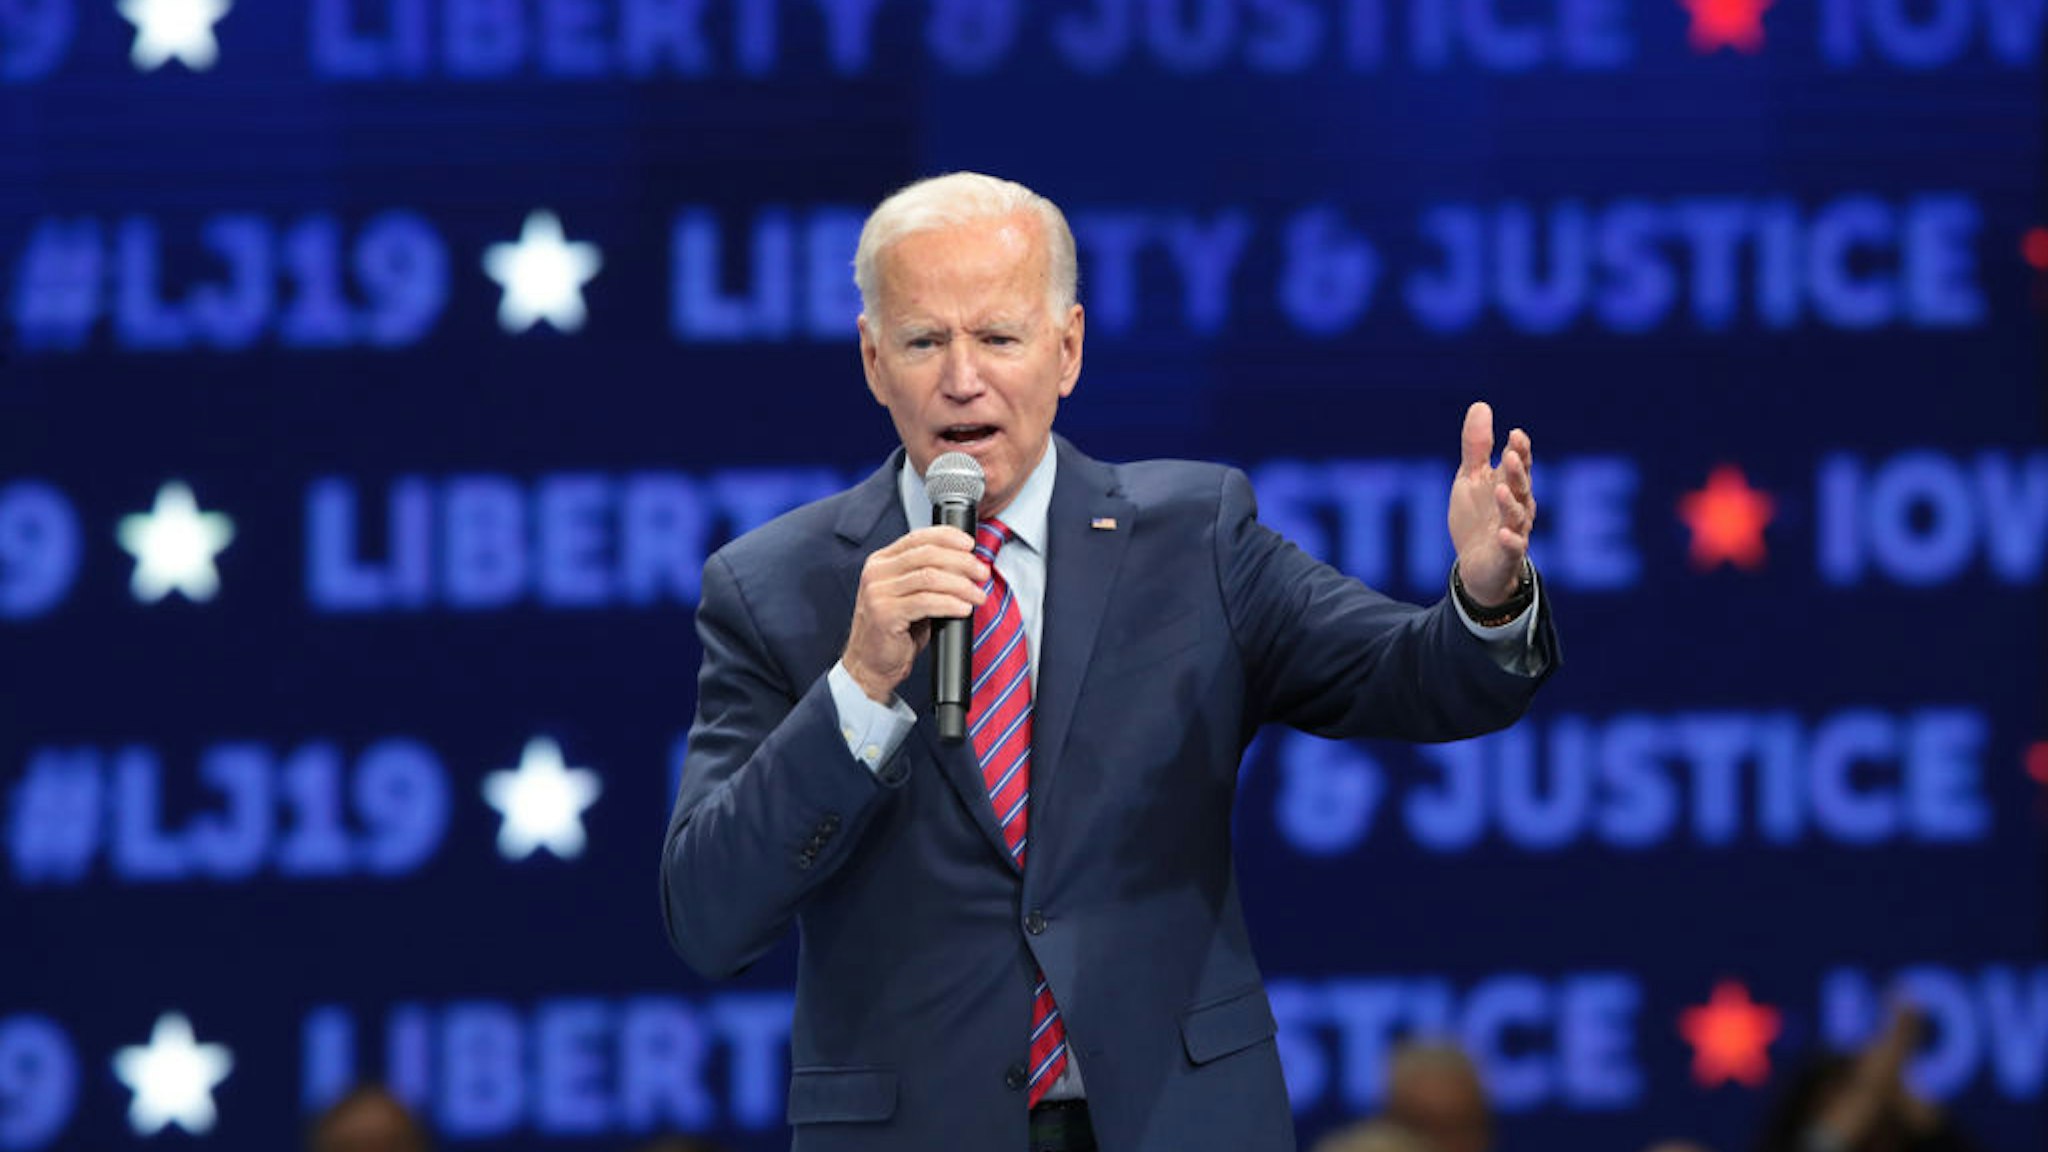 Democratic presidential candidate, former Vice President Joe Biden speaks at the Liberty and Justice Celebration at the Wells Fargo Arena on November 01, 2019 in Des Moines, Iowa.